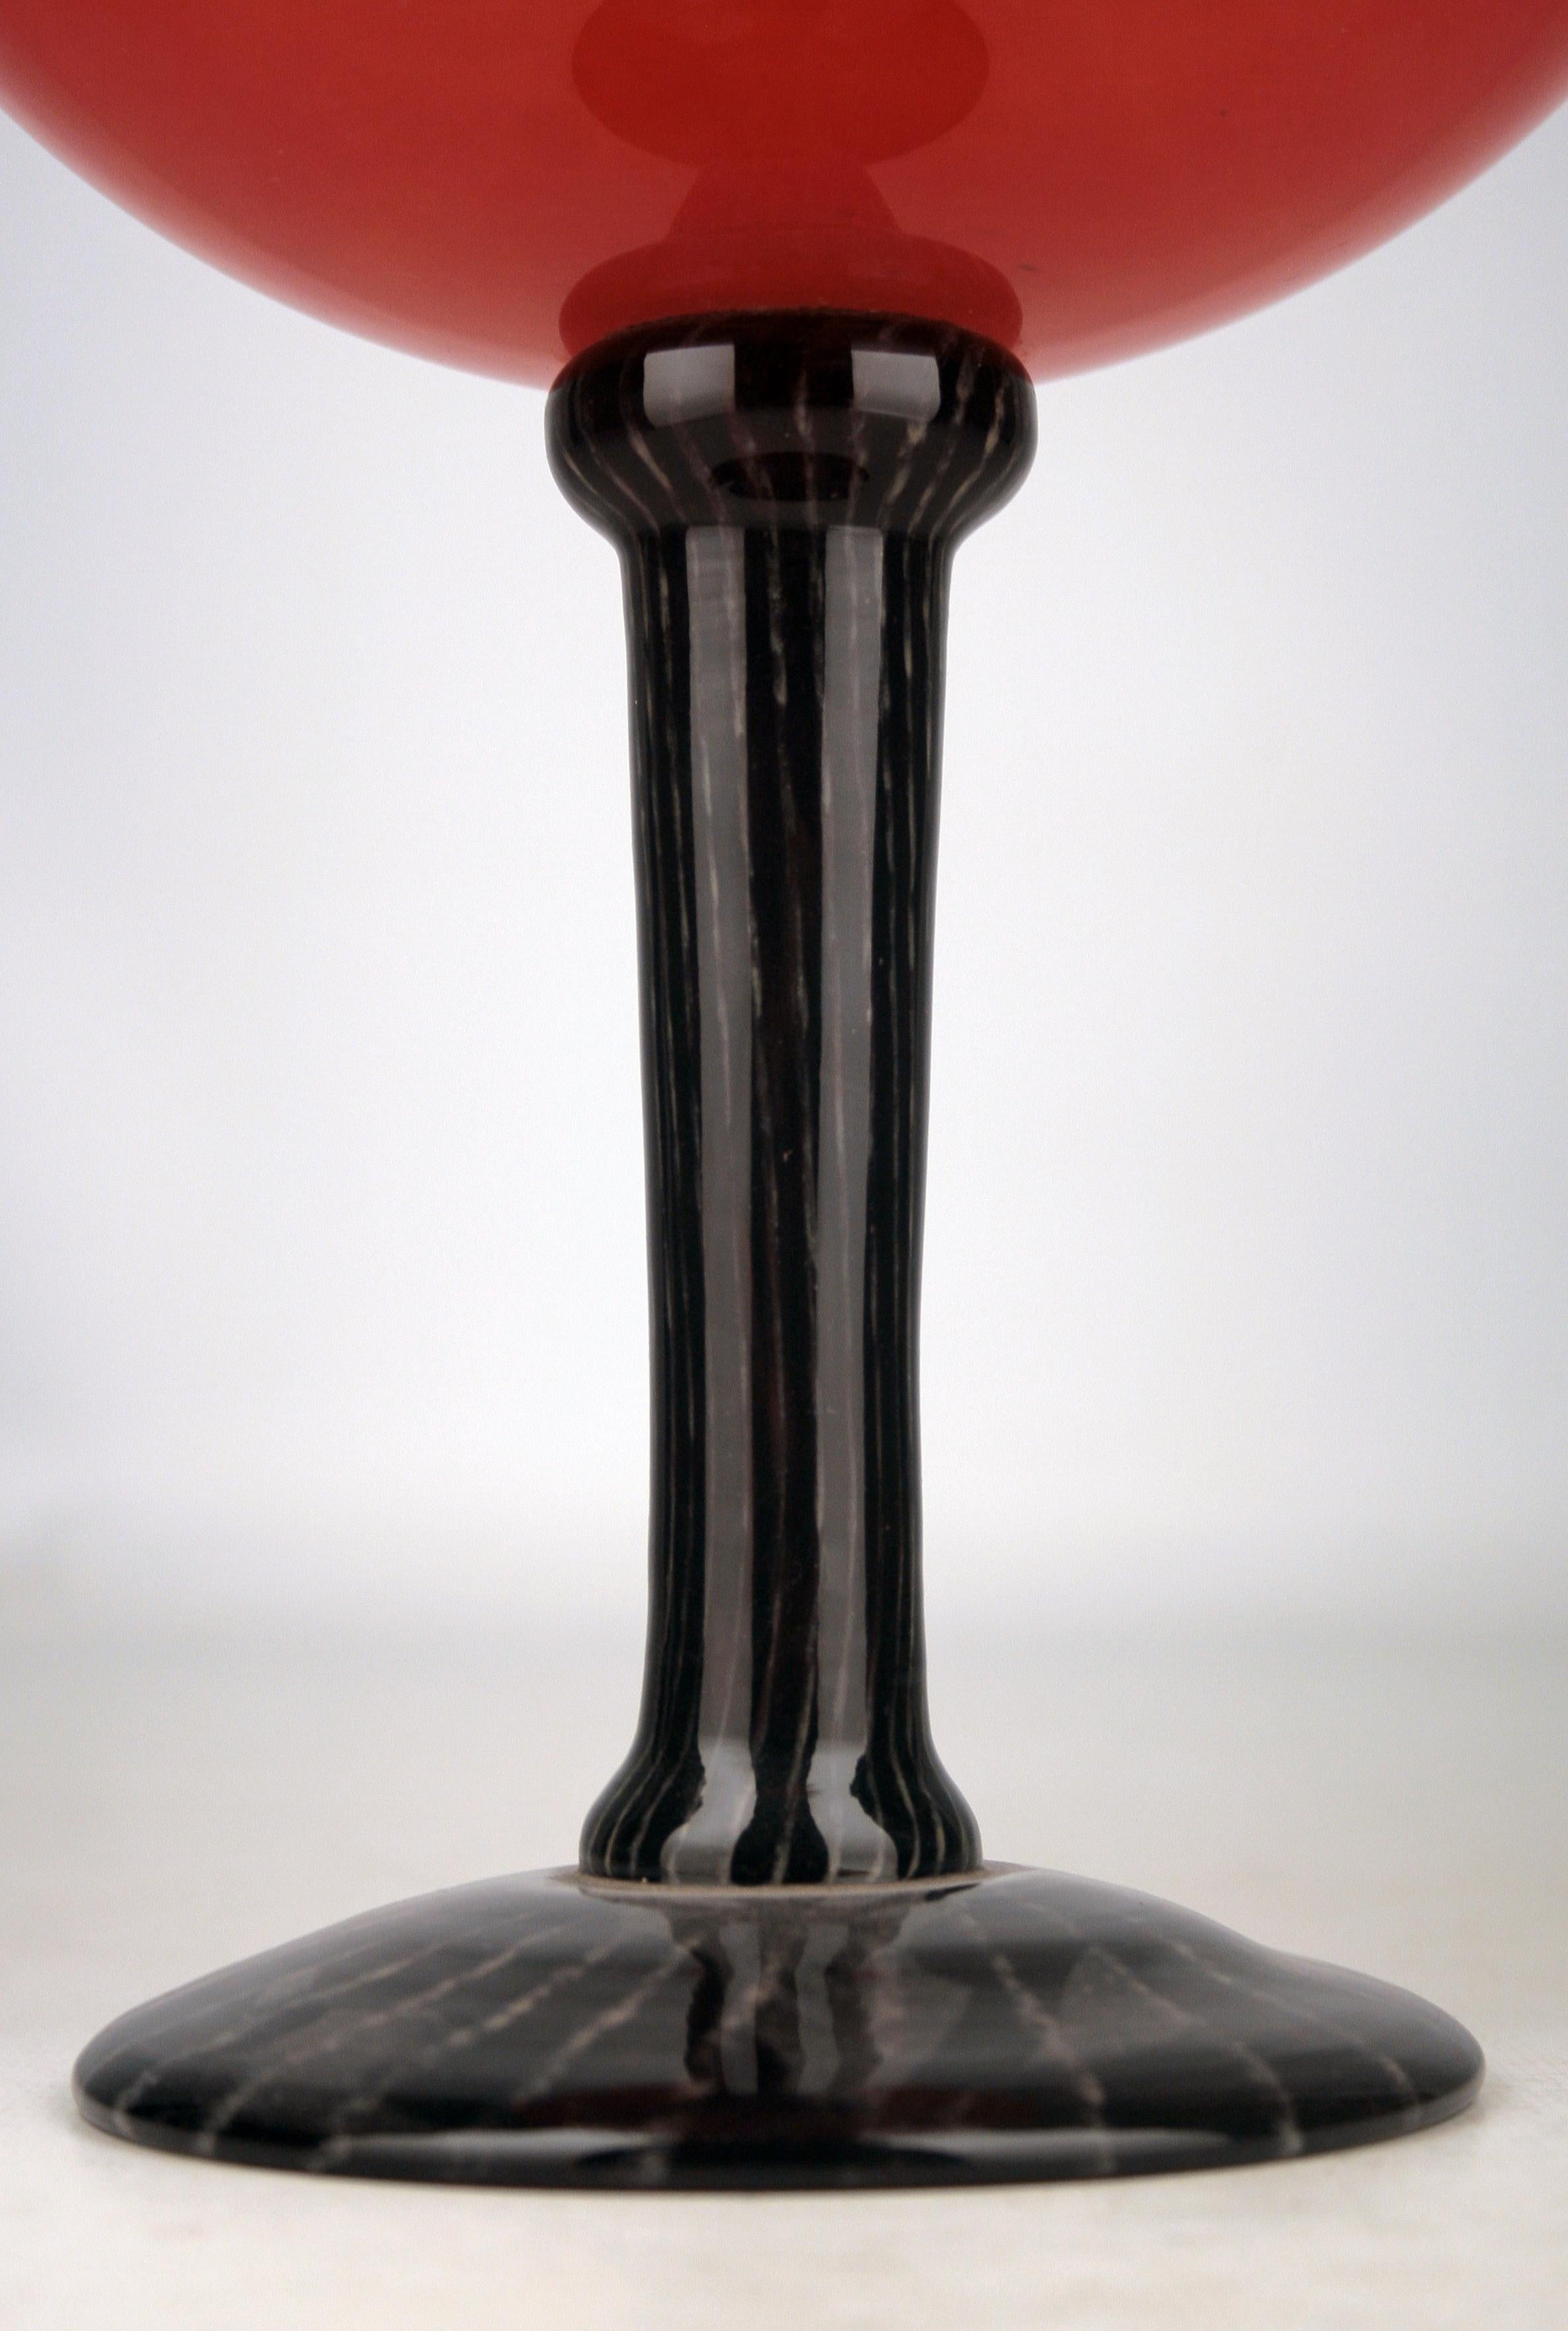 20th Century Art Nouveau/Art Déco French Art Glass Footed Vase by German Charles Schneider For Sale